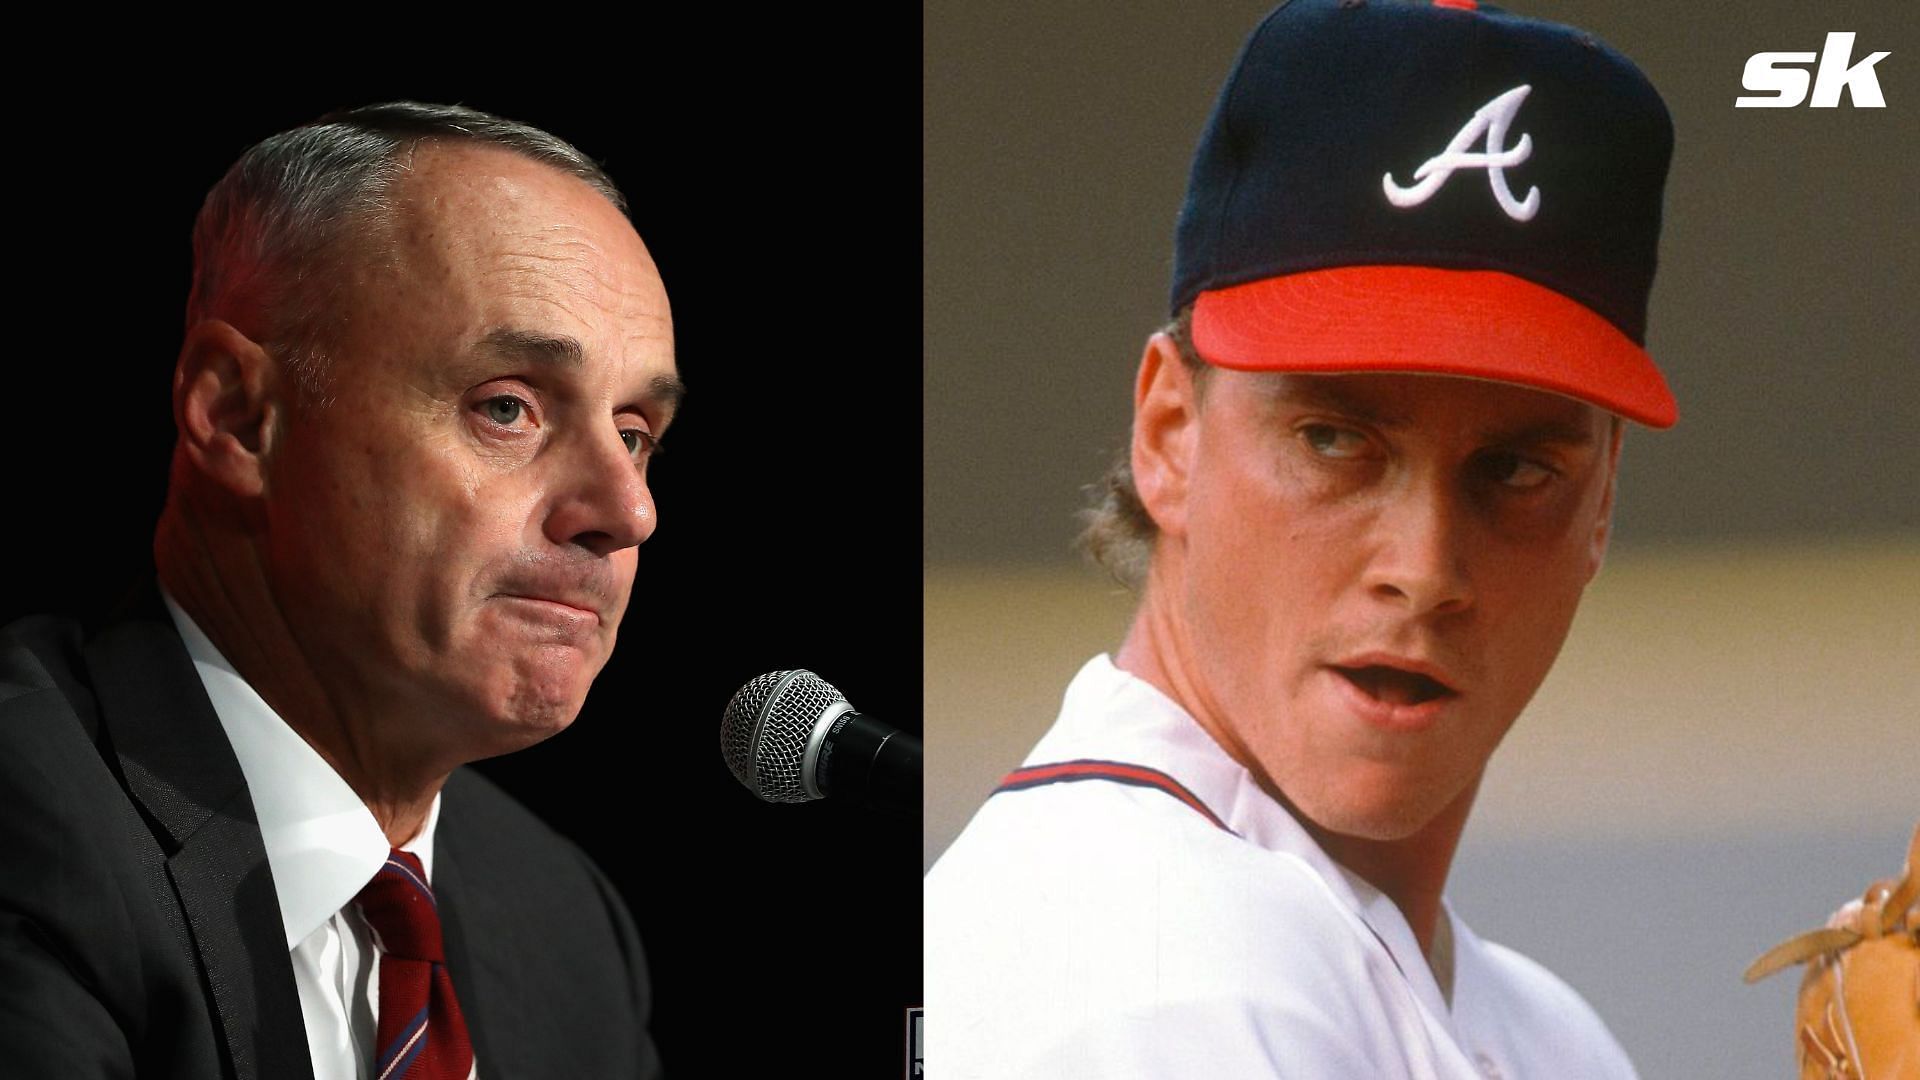 Former pitcher Tom Glavine has slammed rumors that MLB might be looking at robotic umpires